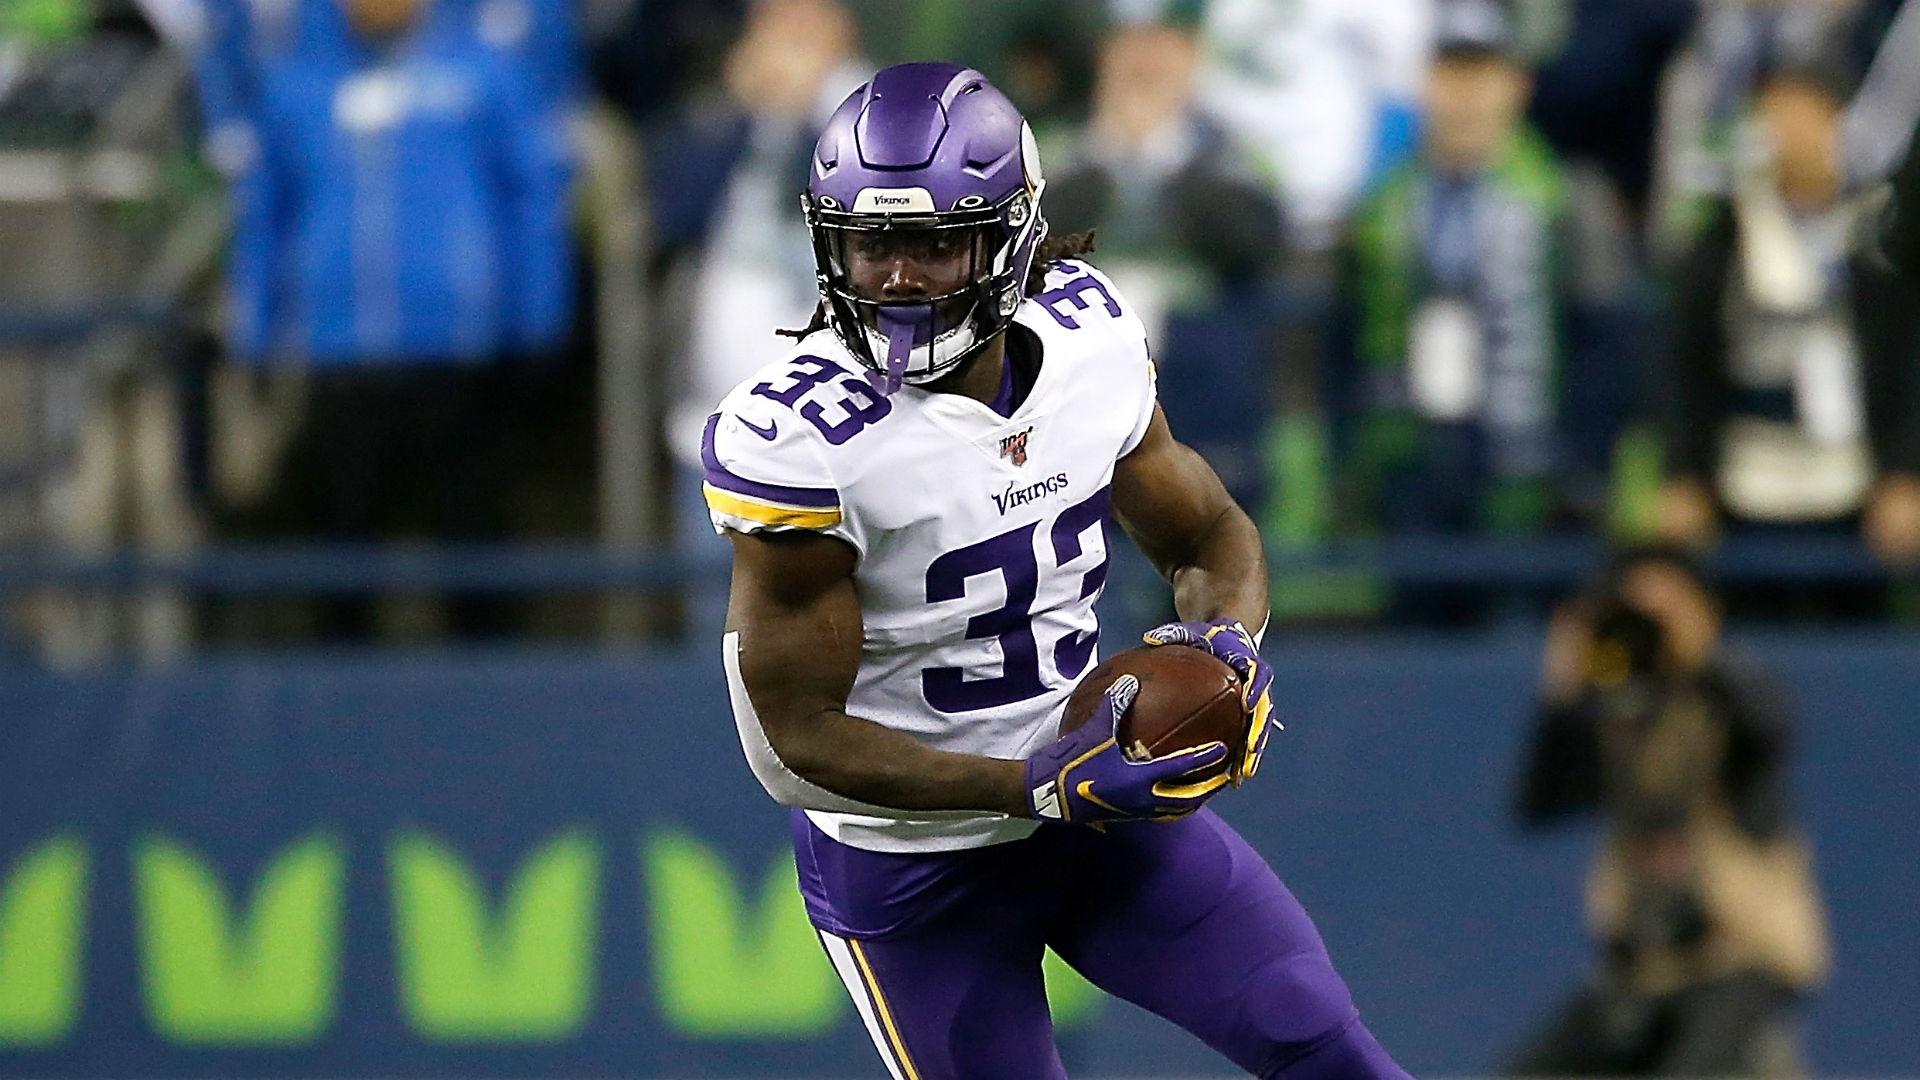 The Minnesota Vikings should still be able to count on Dalvin Cook against the Detroit Lions in Week 14 despite a shoulder issue.